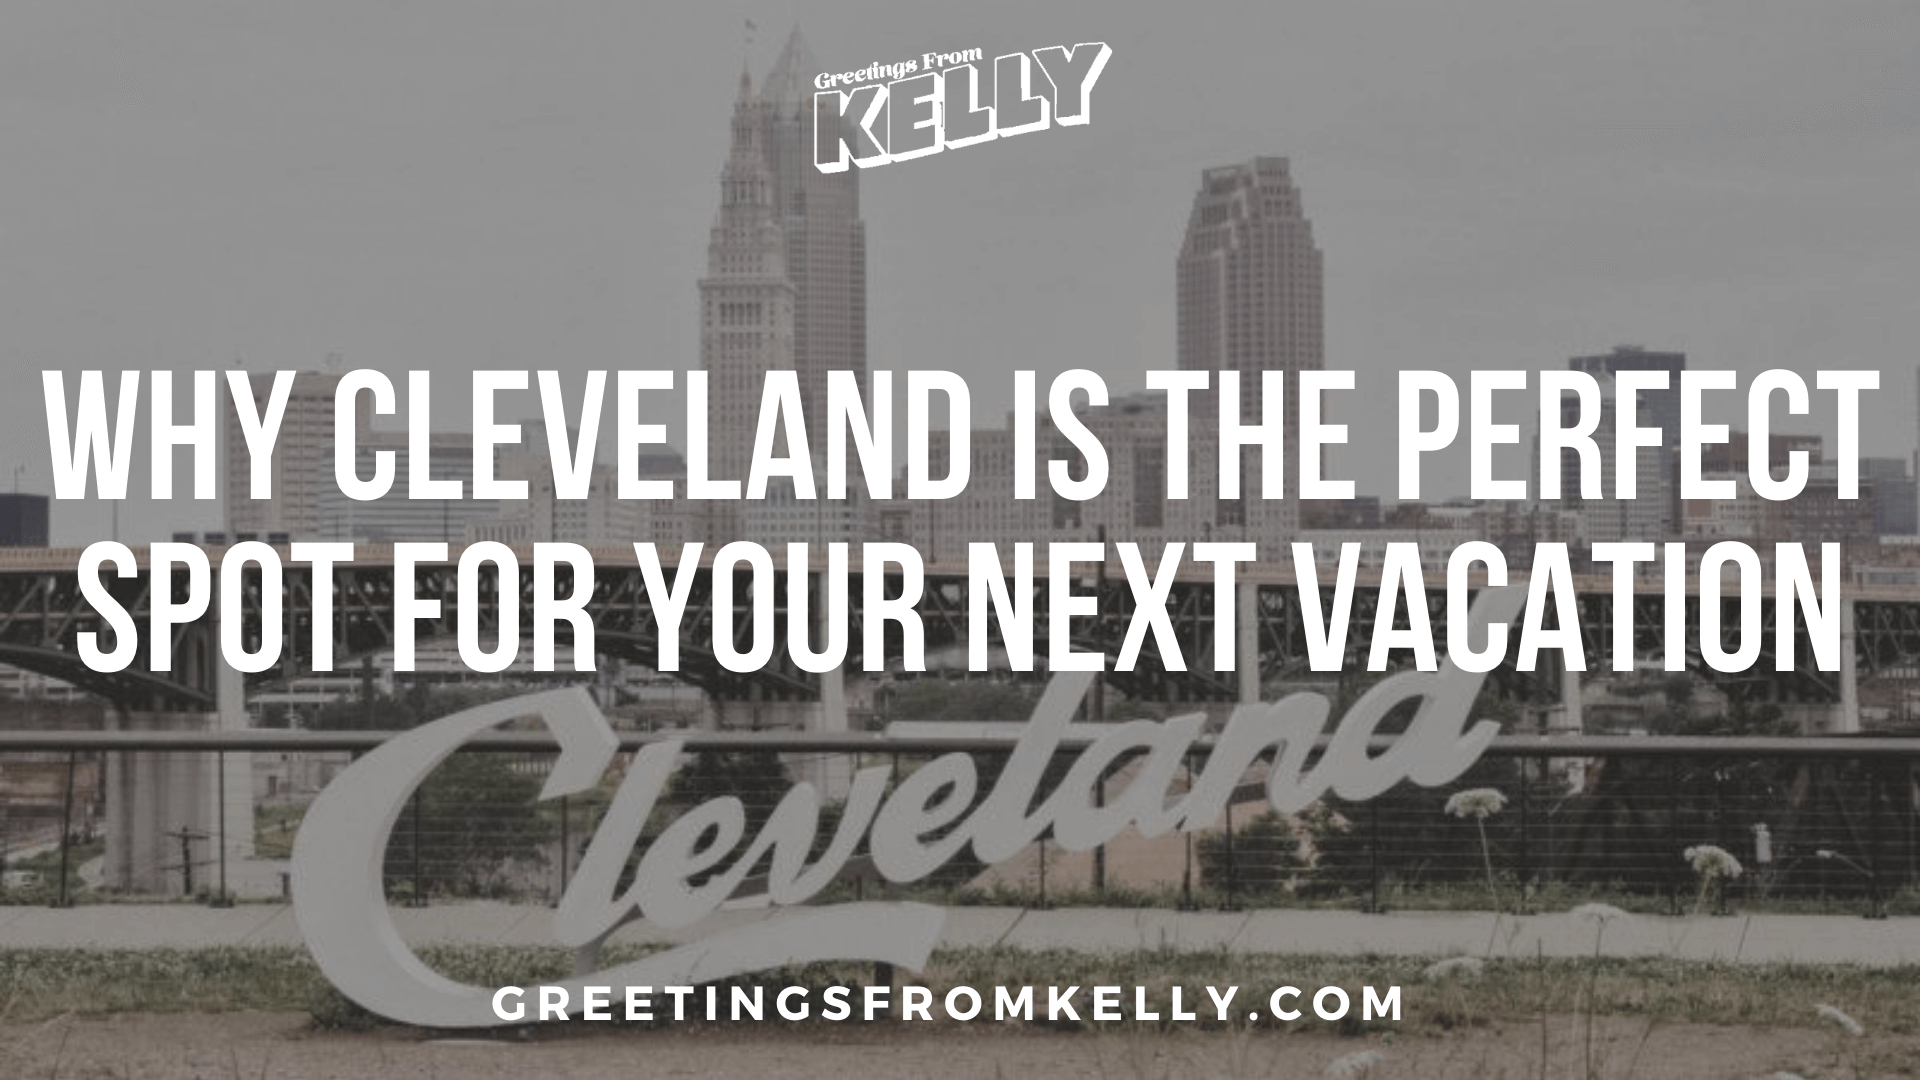 Why Cleveland is the Perfect Spot for your Next Vacation